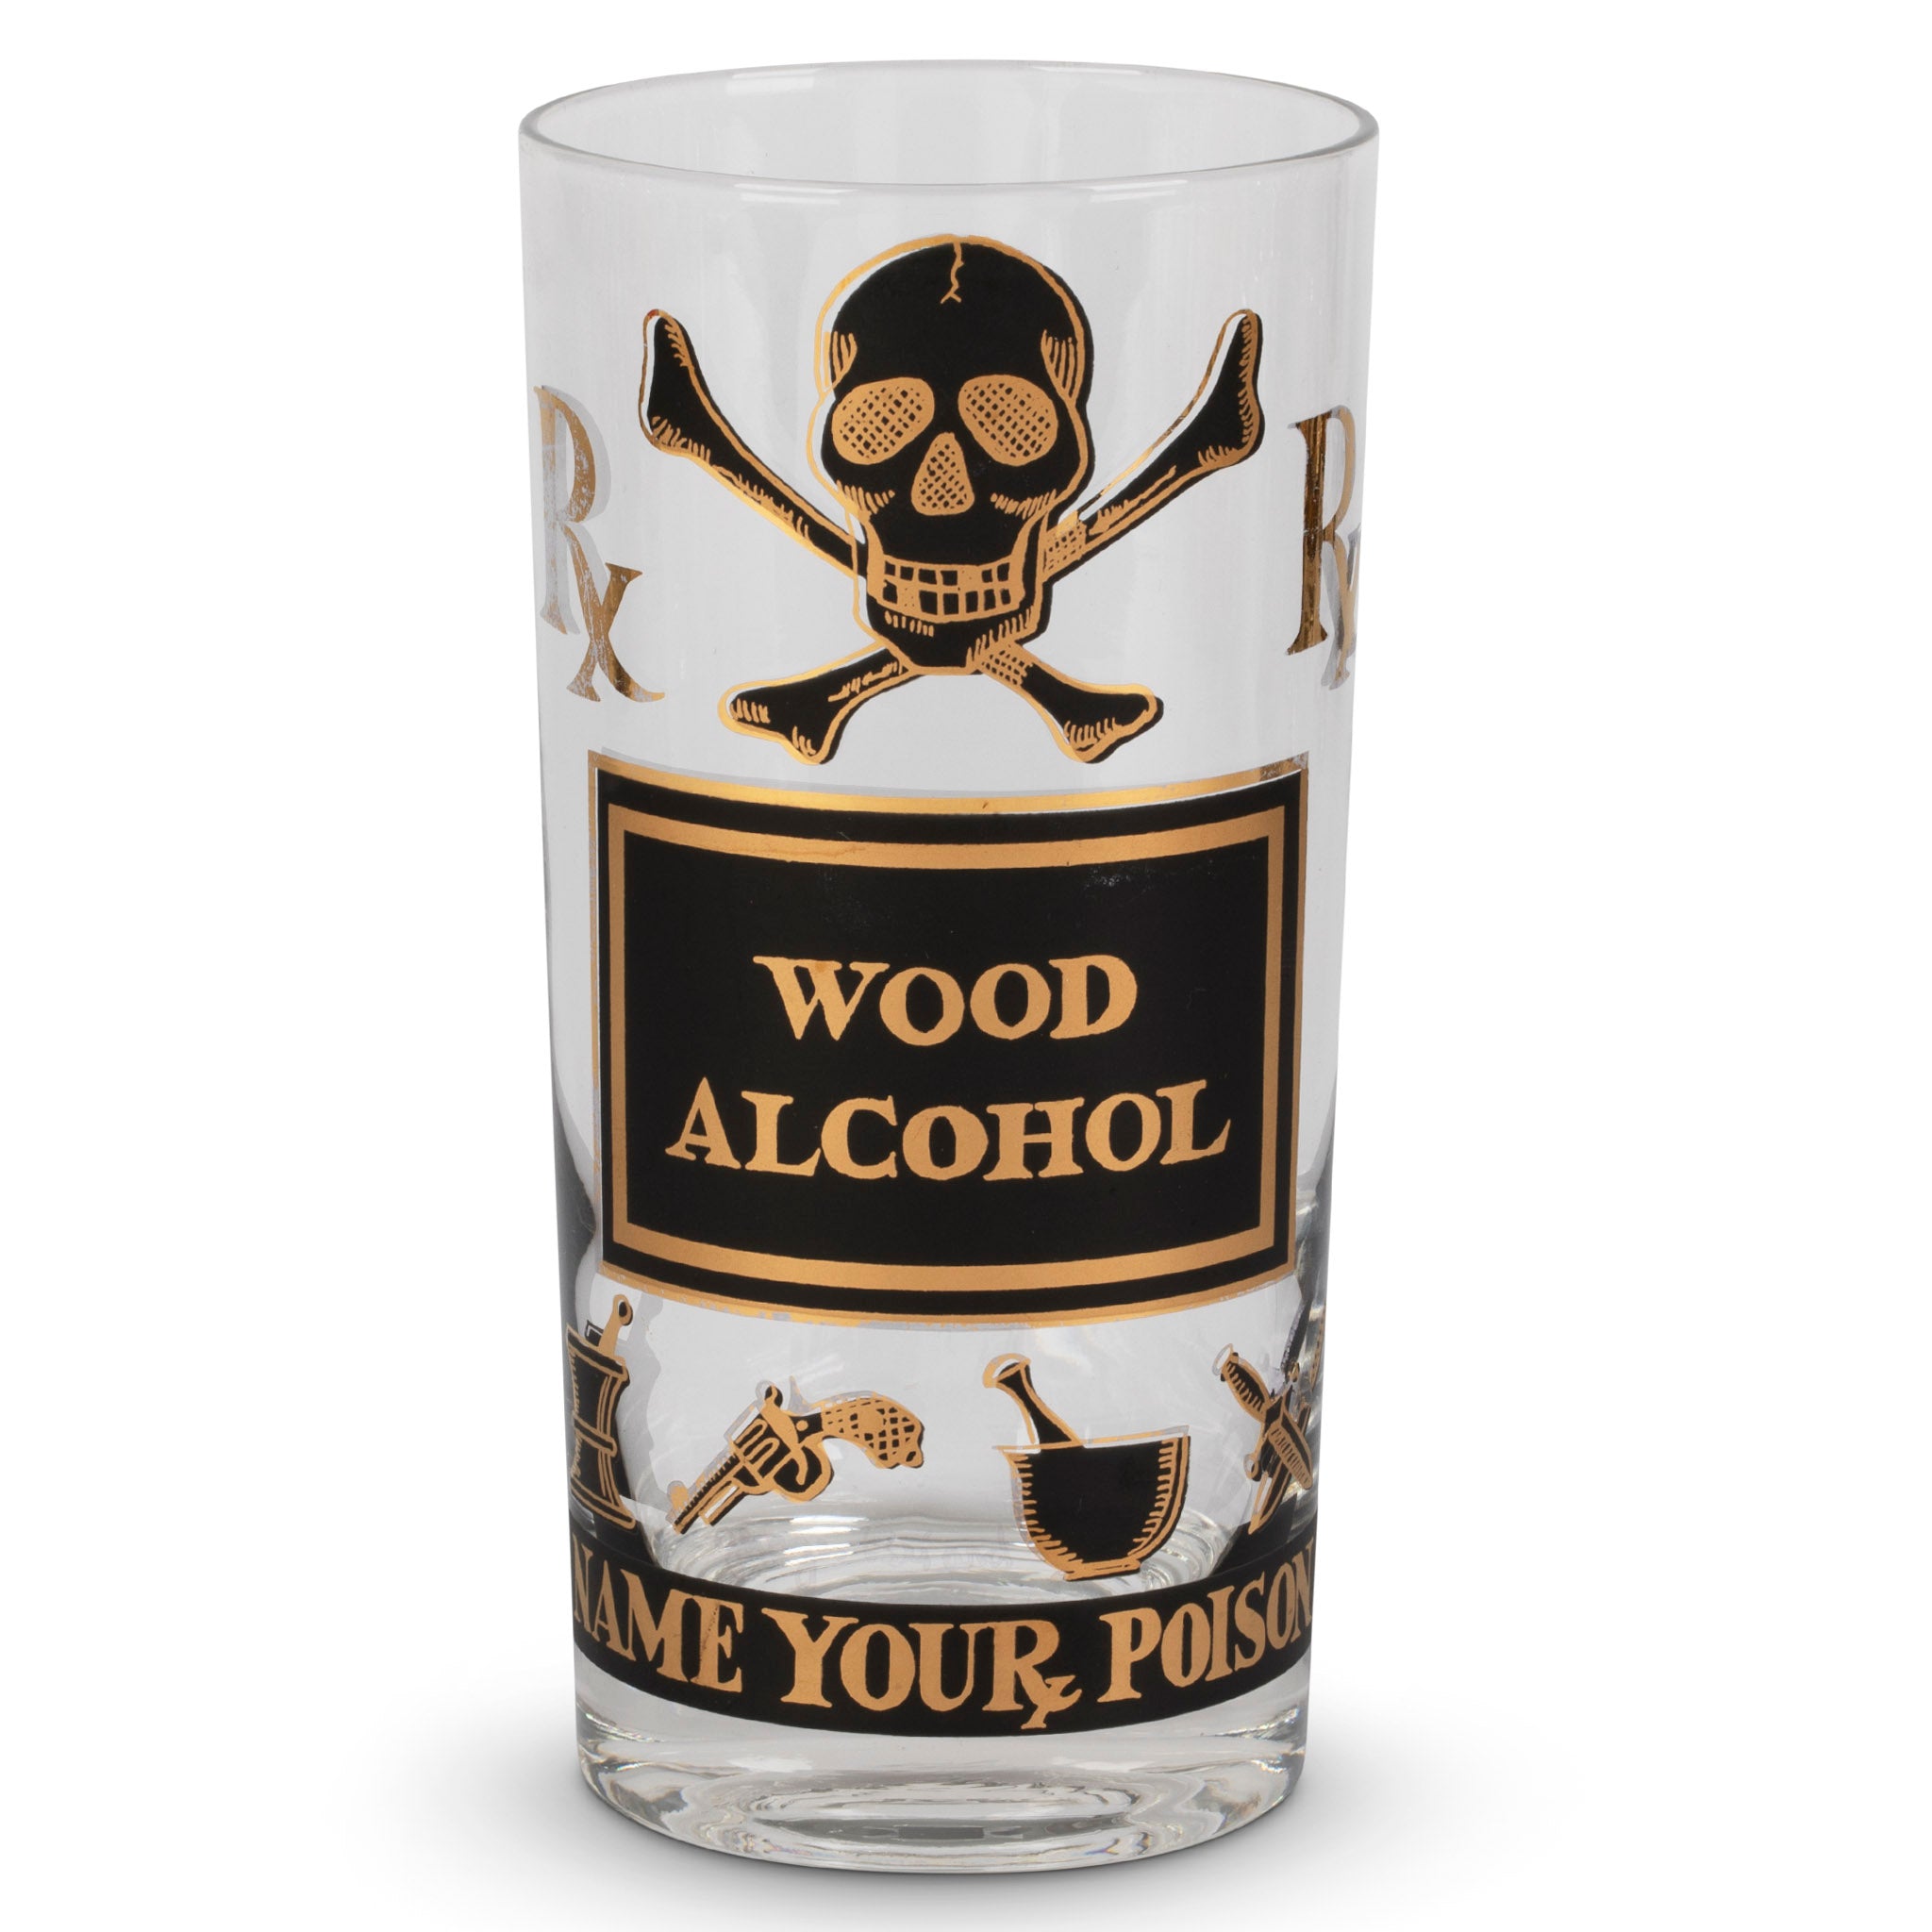 Georges Briard "Name Your Poison" Highball Glass Set